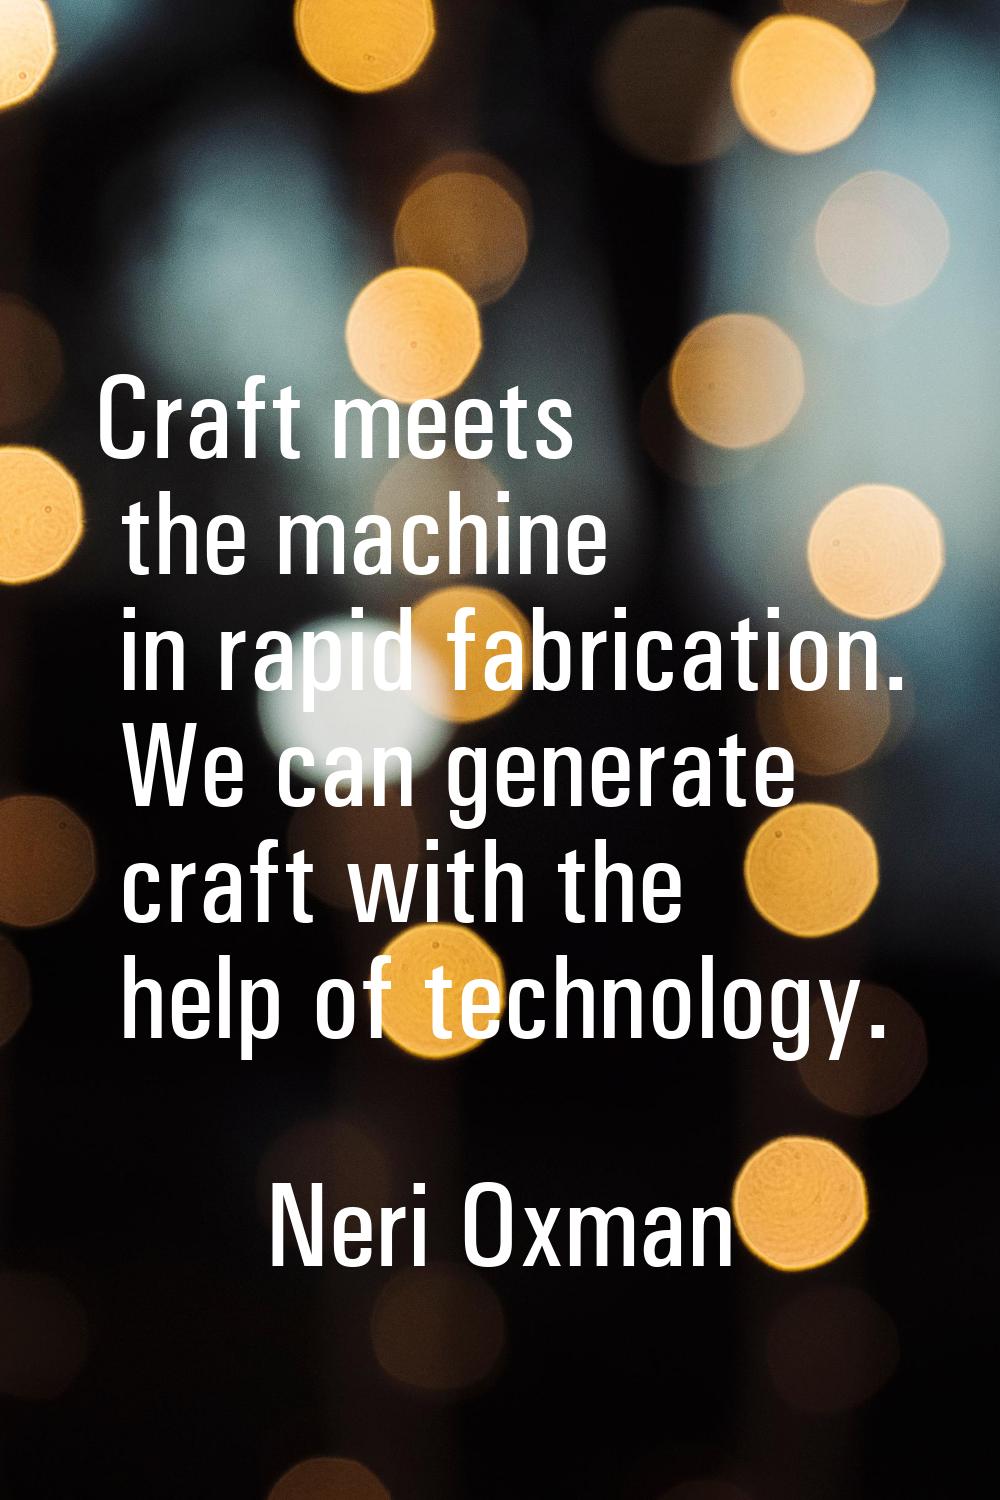 Craft meets the machine in rapid fabrication. We can generate craft with the help of technology.